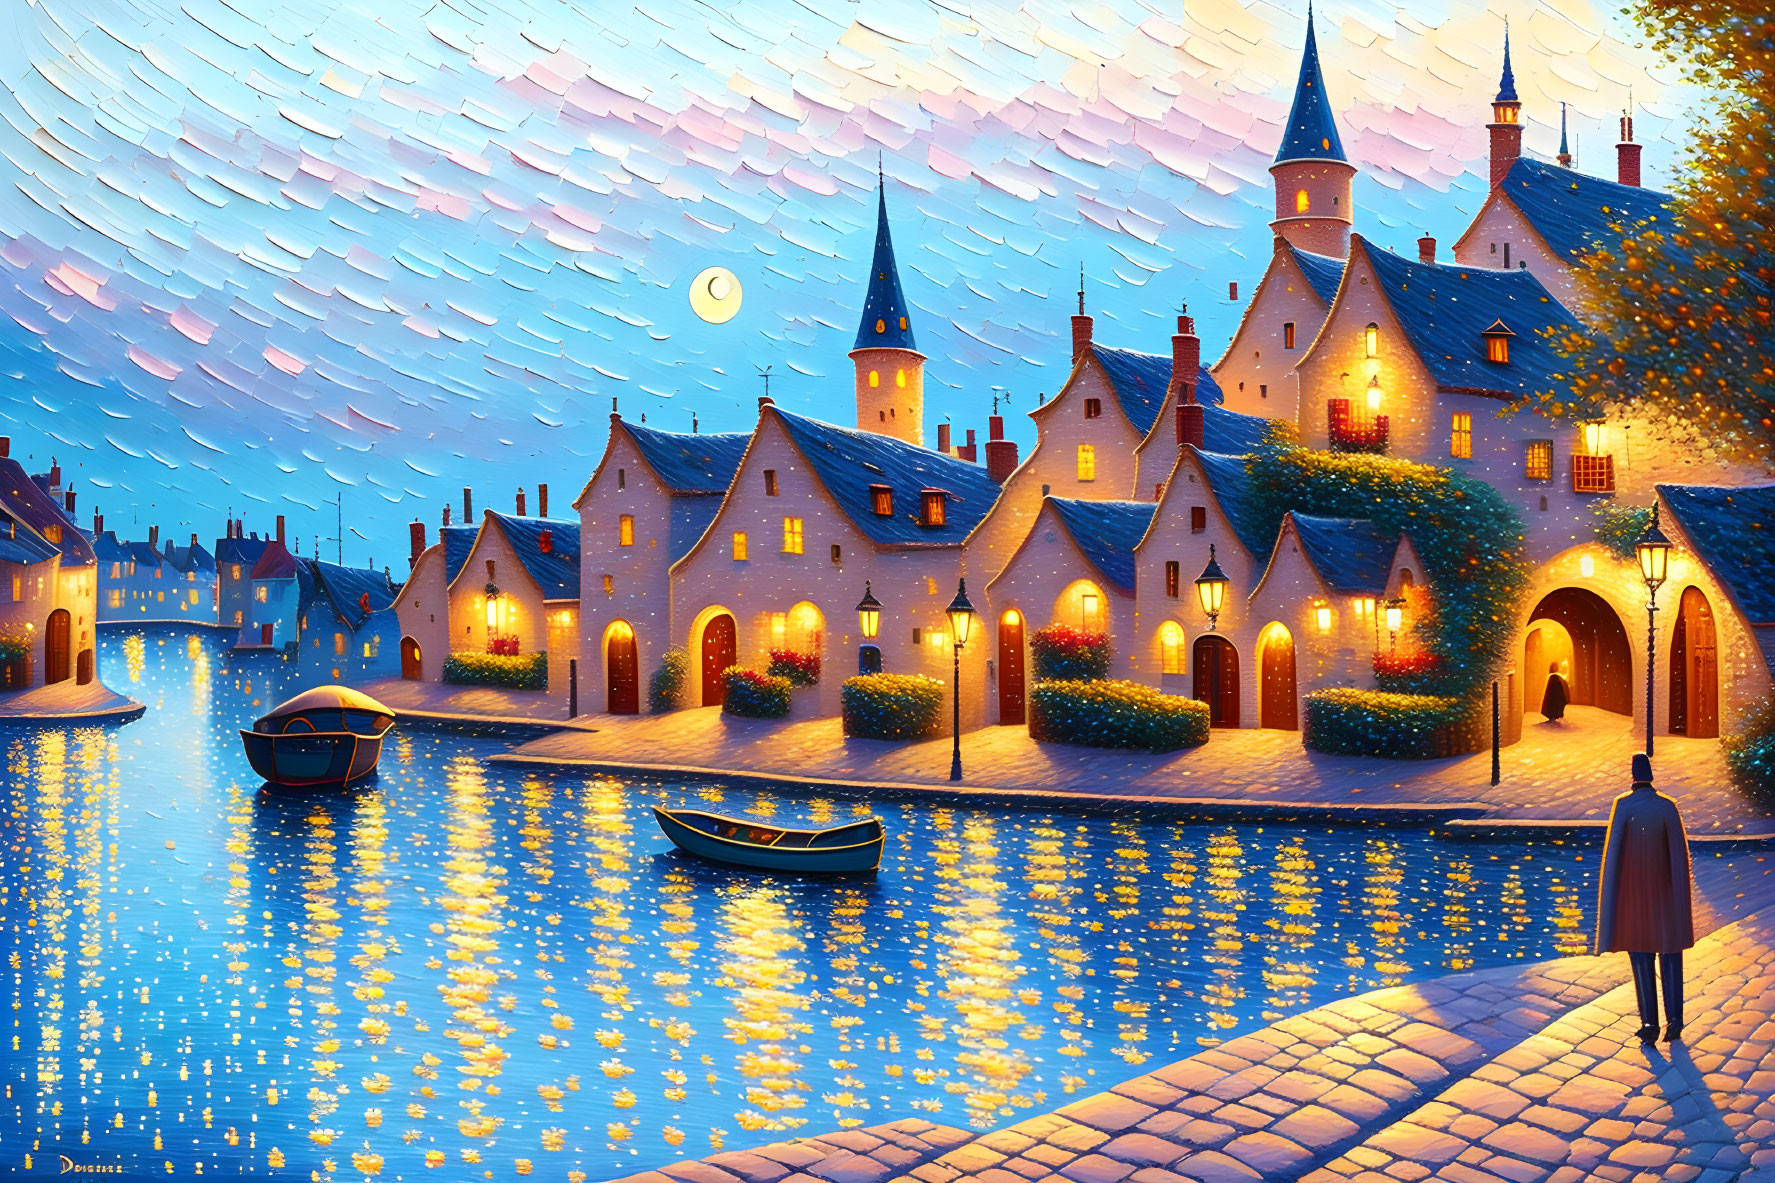 Starry night painting of tranquil village with cobblestone paths